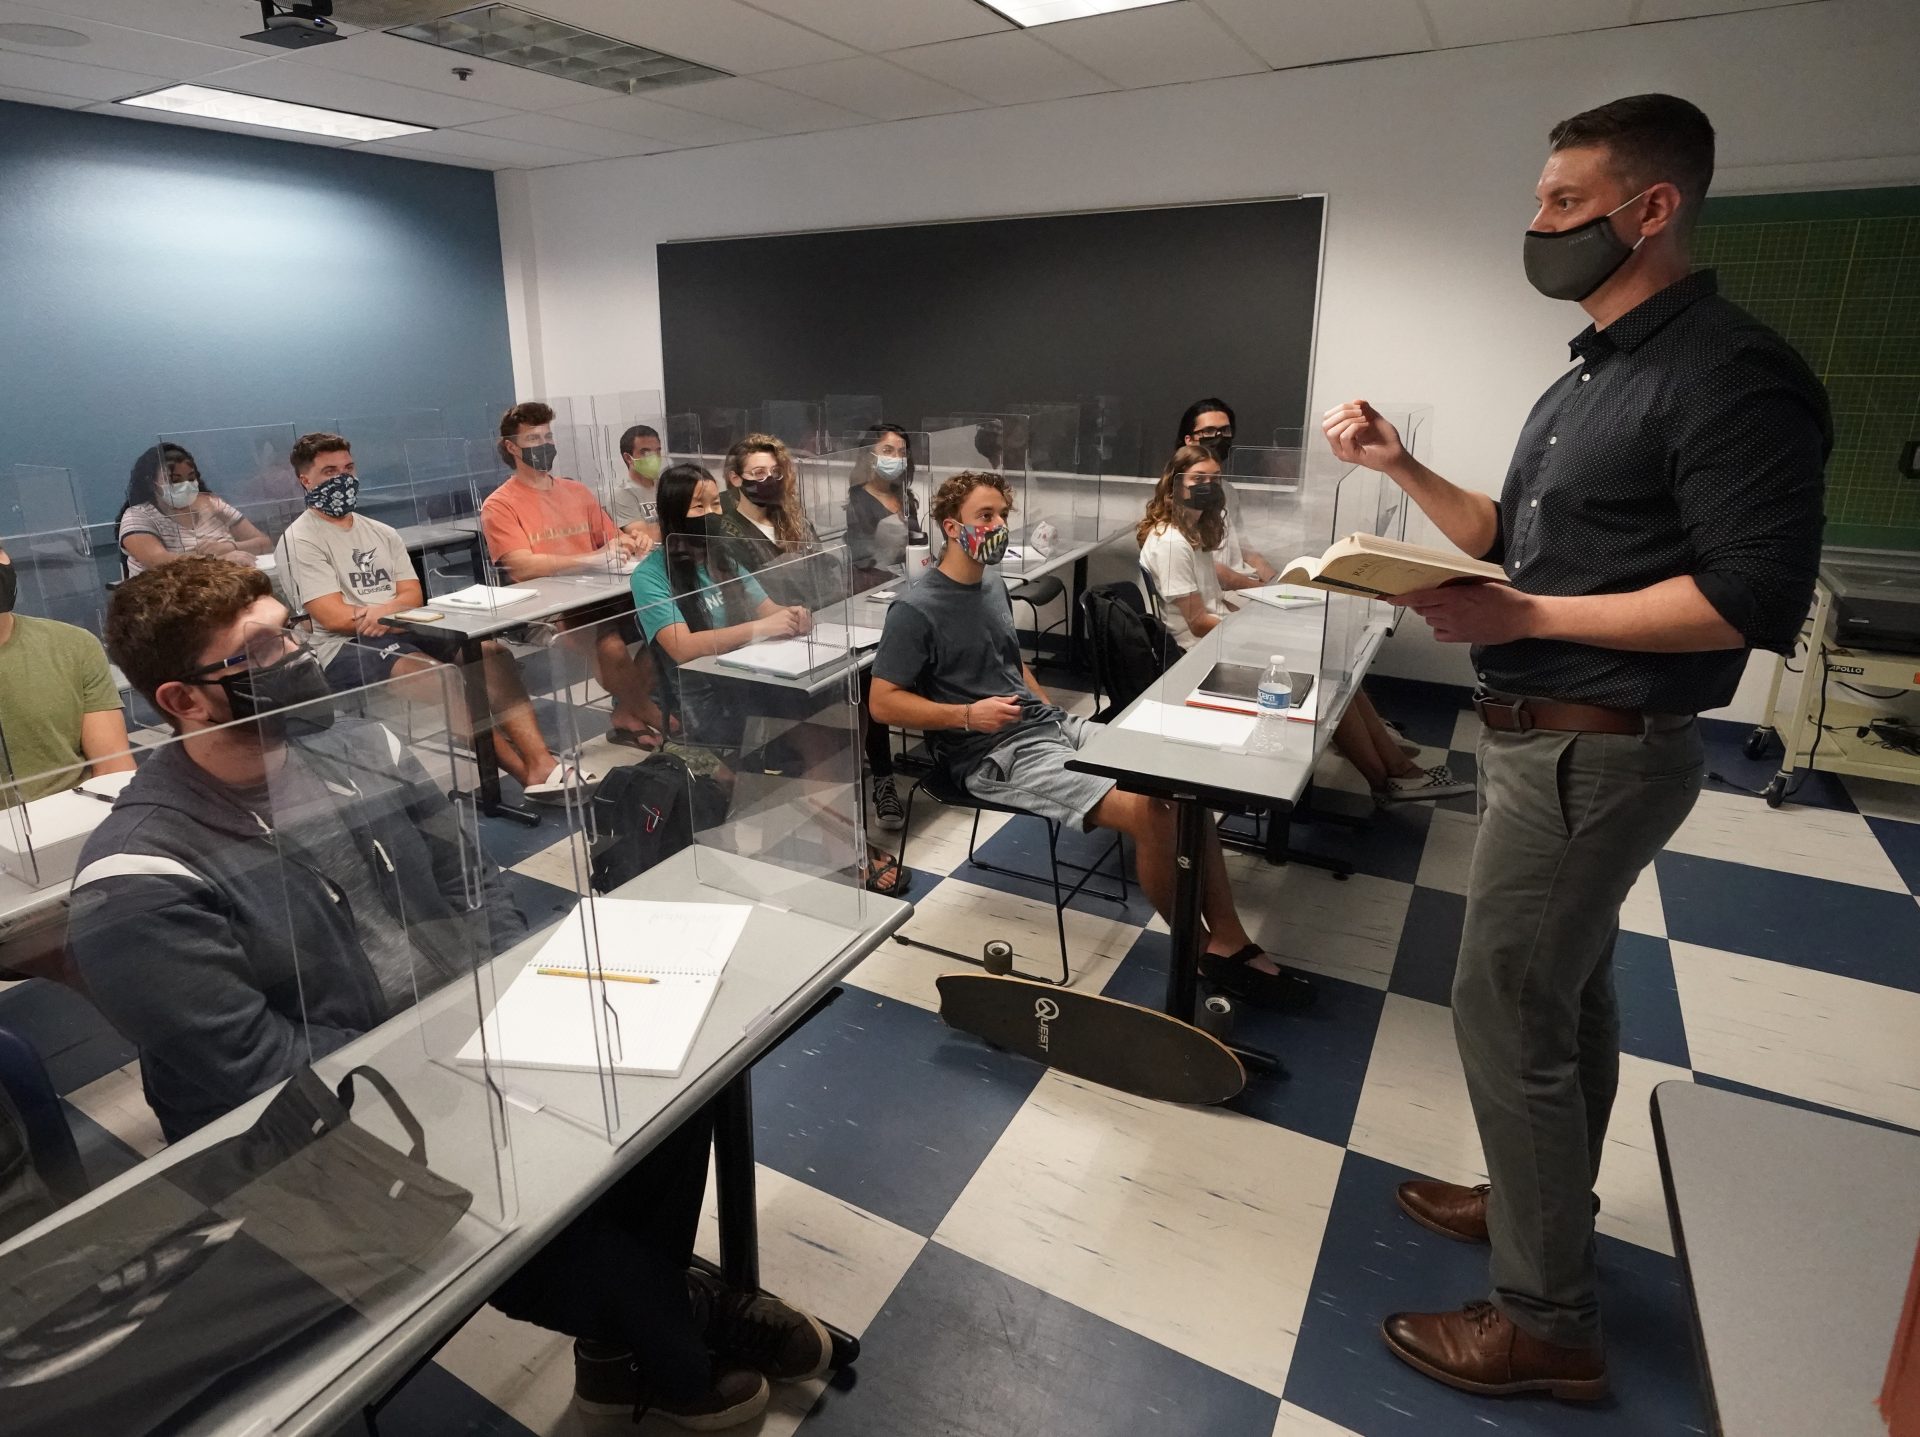 The CDC announced Thursday that fully vaccinated people can safely stop wearing masks indoors. Kyle Faircloth, Associate Professor of Intercultural Studies, is seen teaching a class at Palm Beach Atlantic University in West Palm Beach, Fla., in February 2021.